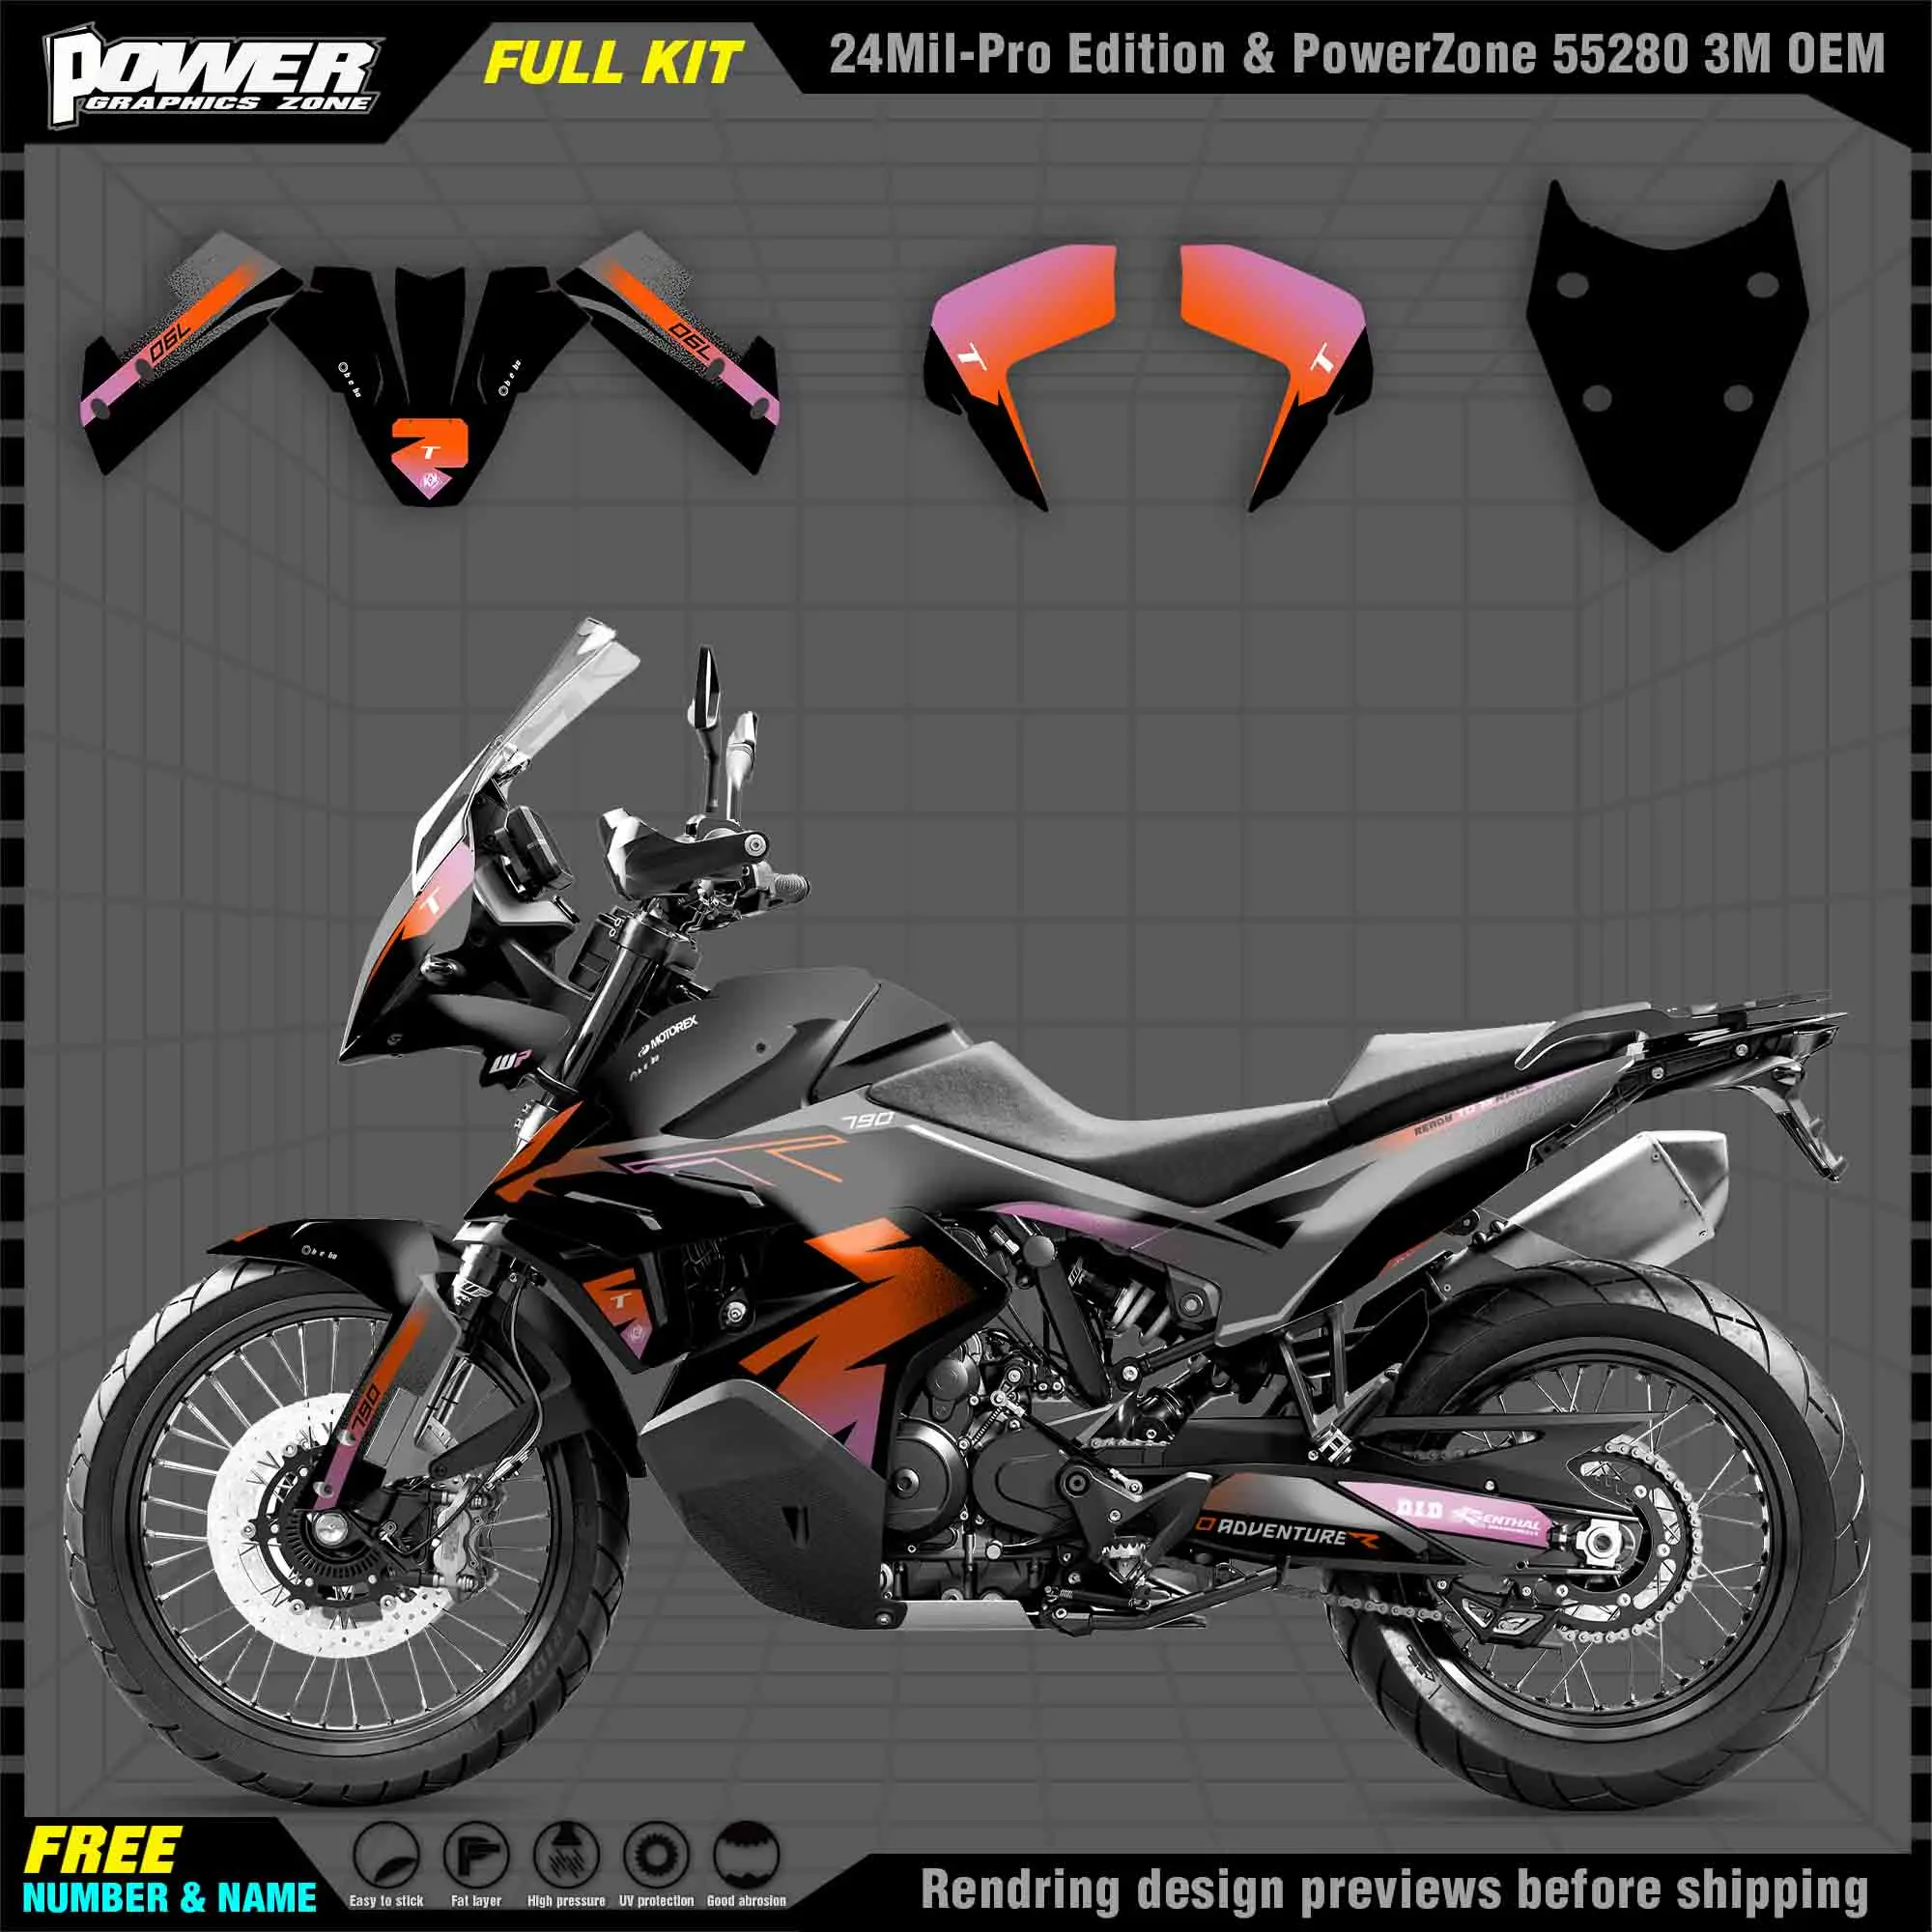 

PowerZone for Custom Team Graphics Backgrounds Decals Stickers Kit For KTM 19-22 790ADV ADV-R Motorcycle 003